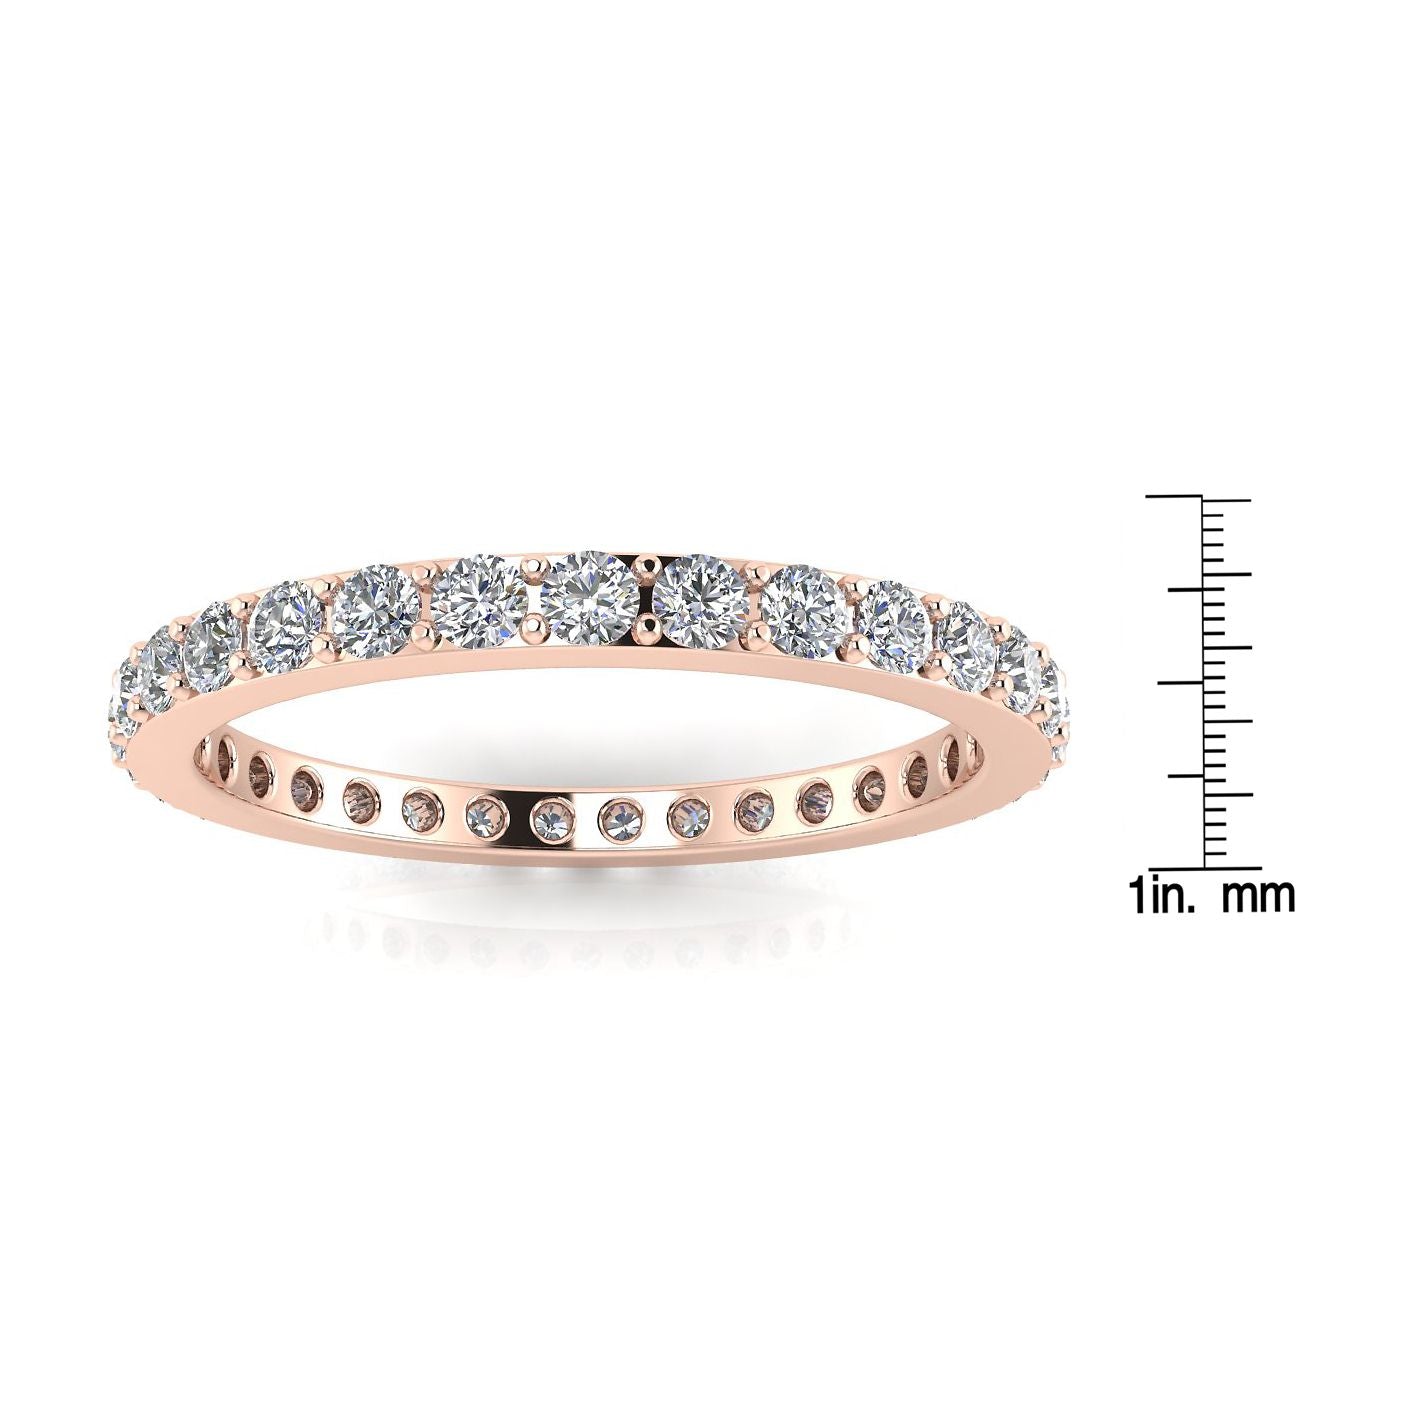 Round Brilliant Cut Diamond Pave Set Eternity Ring In 14k Rose Gold  (0.52ct. Tw.) Ring Size 9